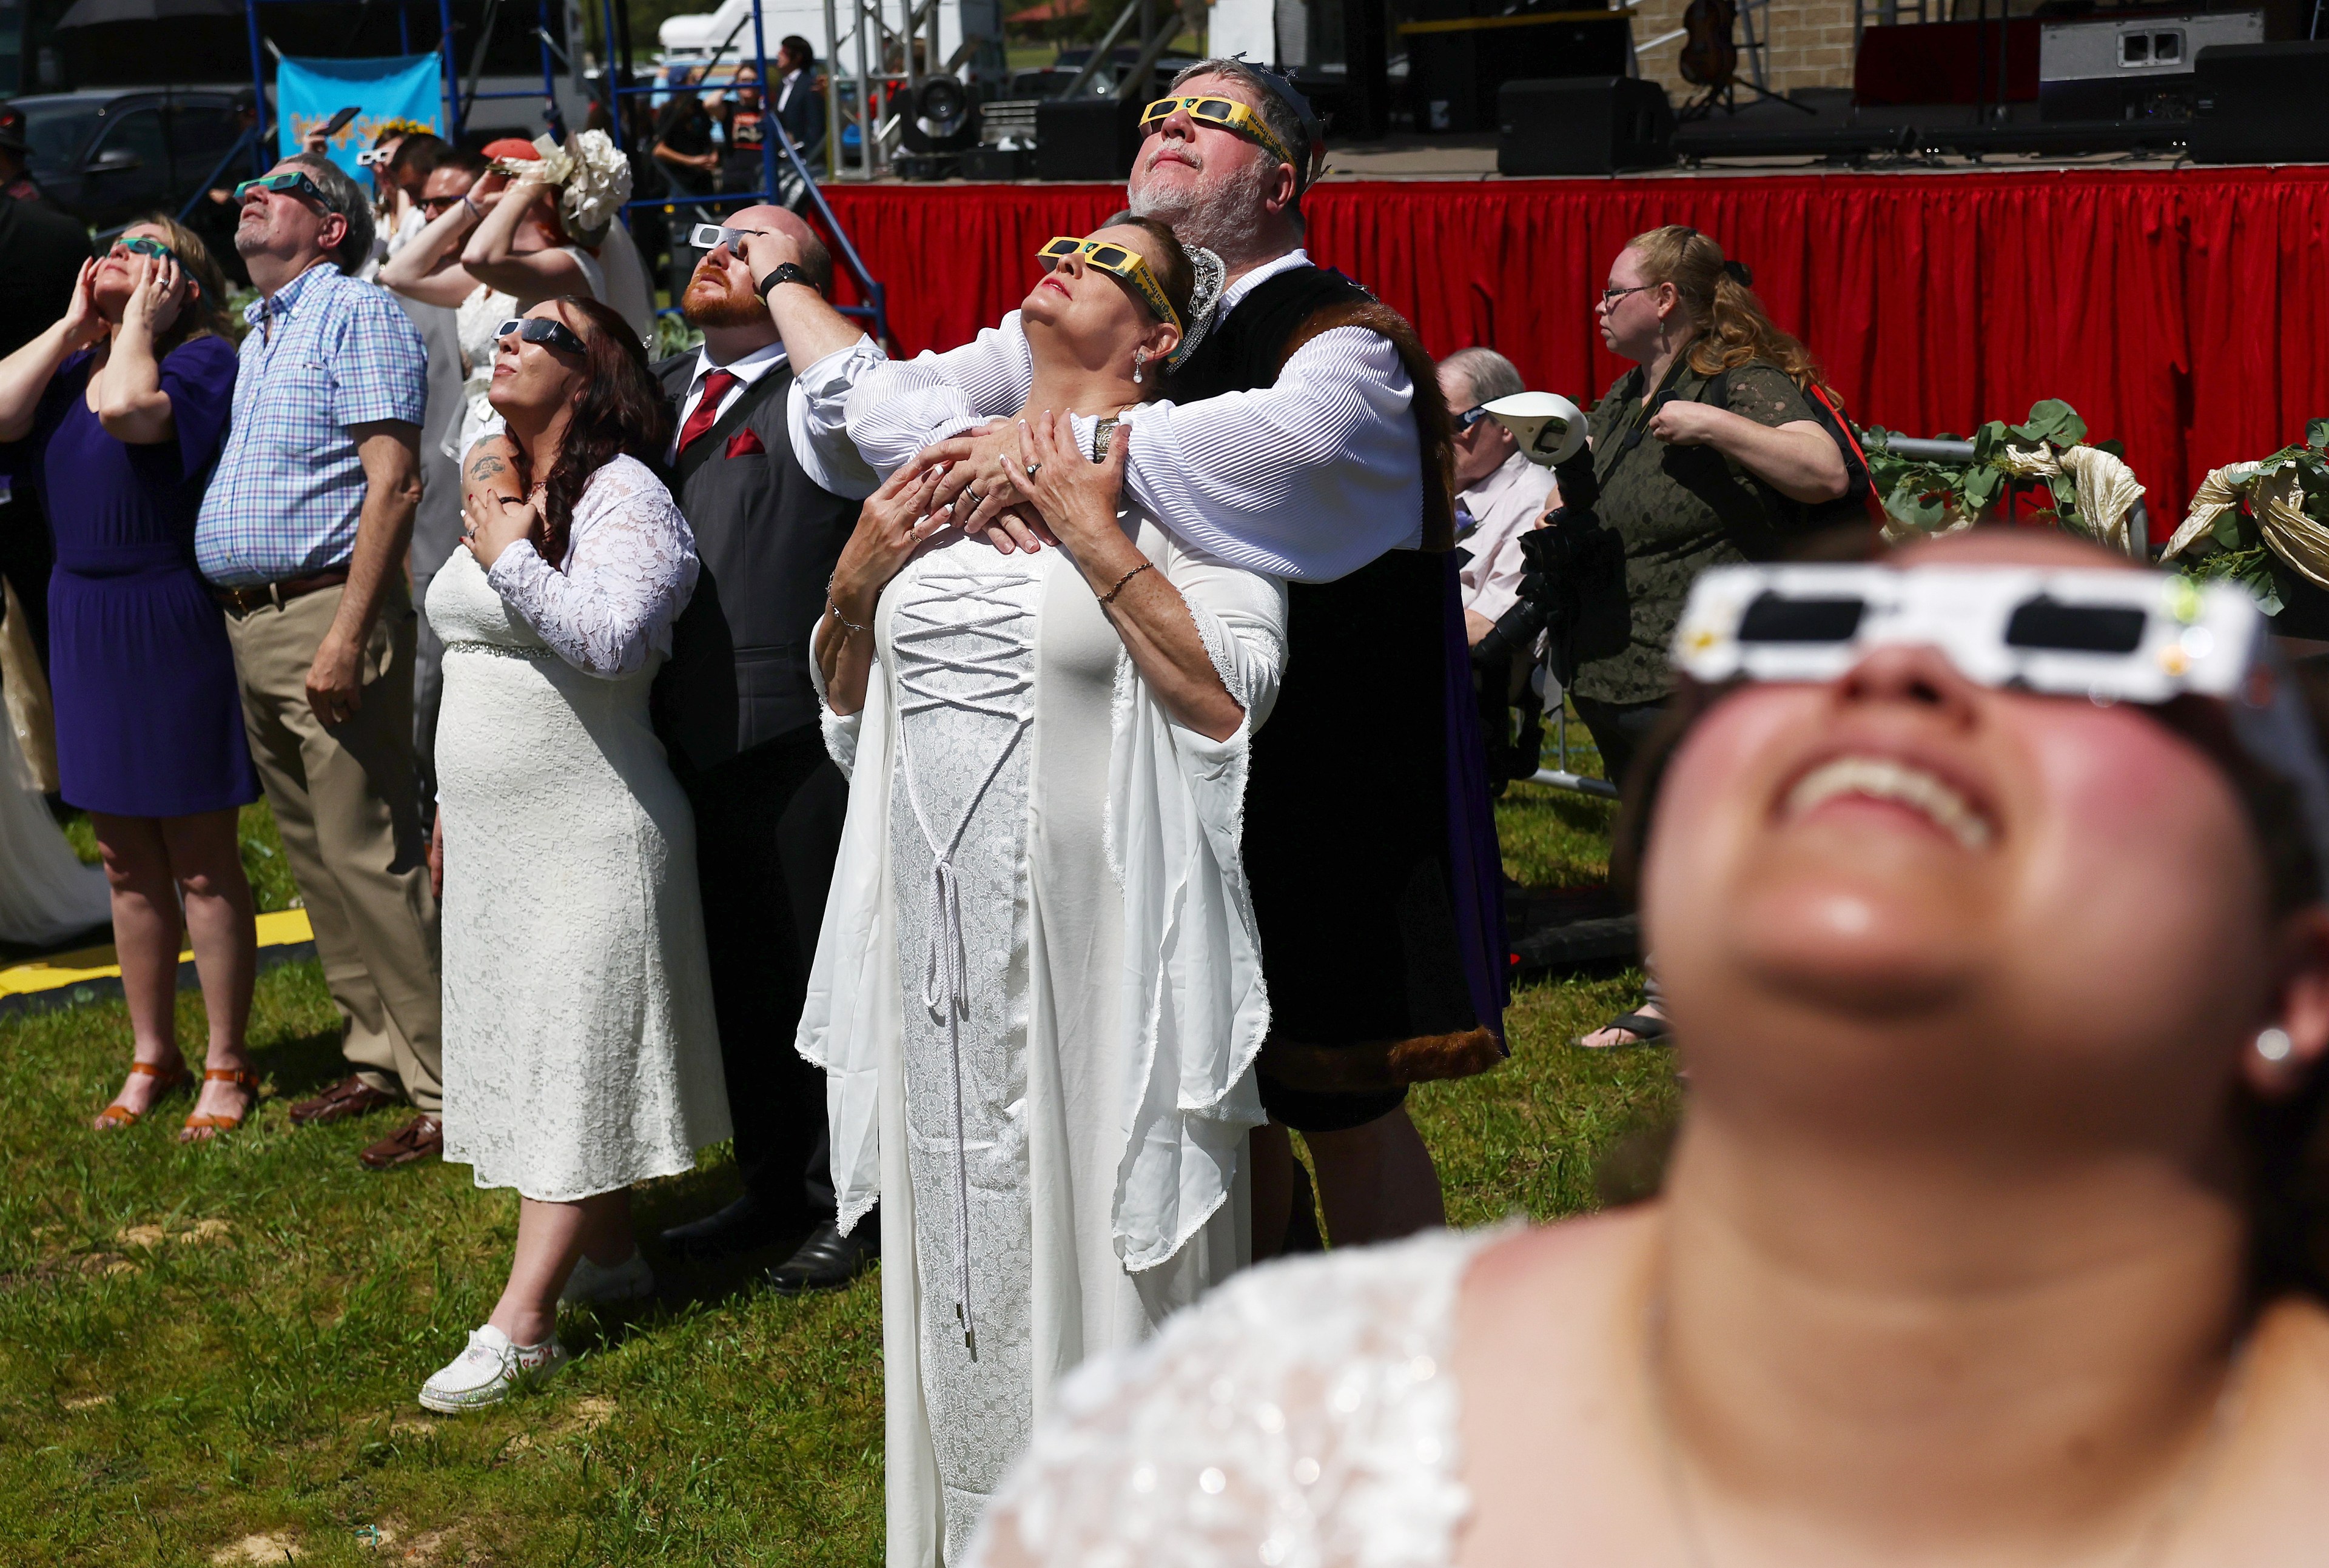 People are wearing special glasses, looking up at the sky; likely viewing an eclipse. A festive atmosphere with a red stage in the background.